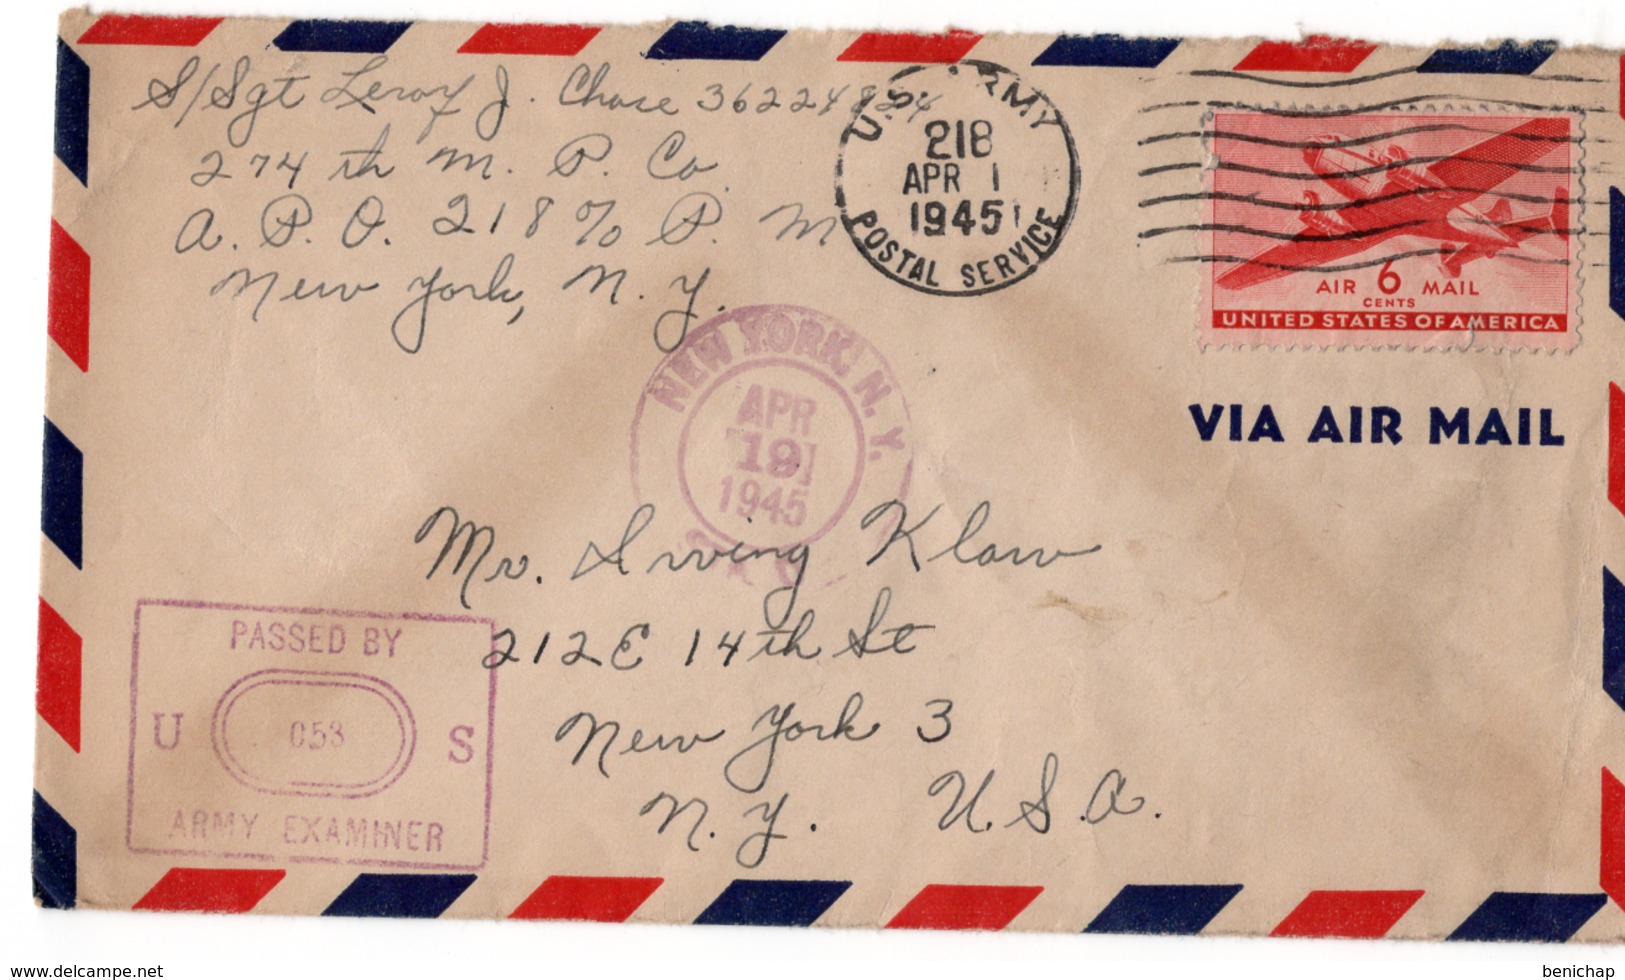 (R22) SCOTT C25 - ARMY EXAMINER - US ARMY - POSTAL SERVICE NEW YORK - 1945. - 2c. 1941-1960 Covers